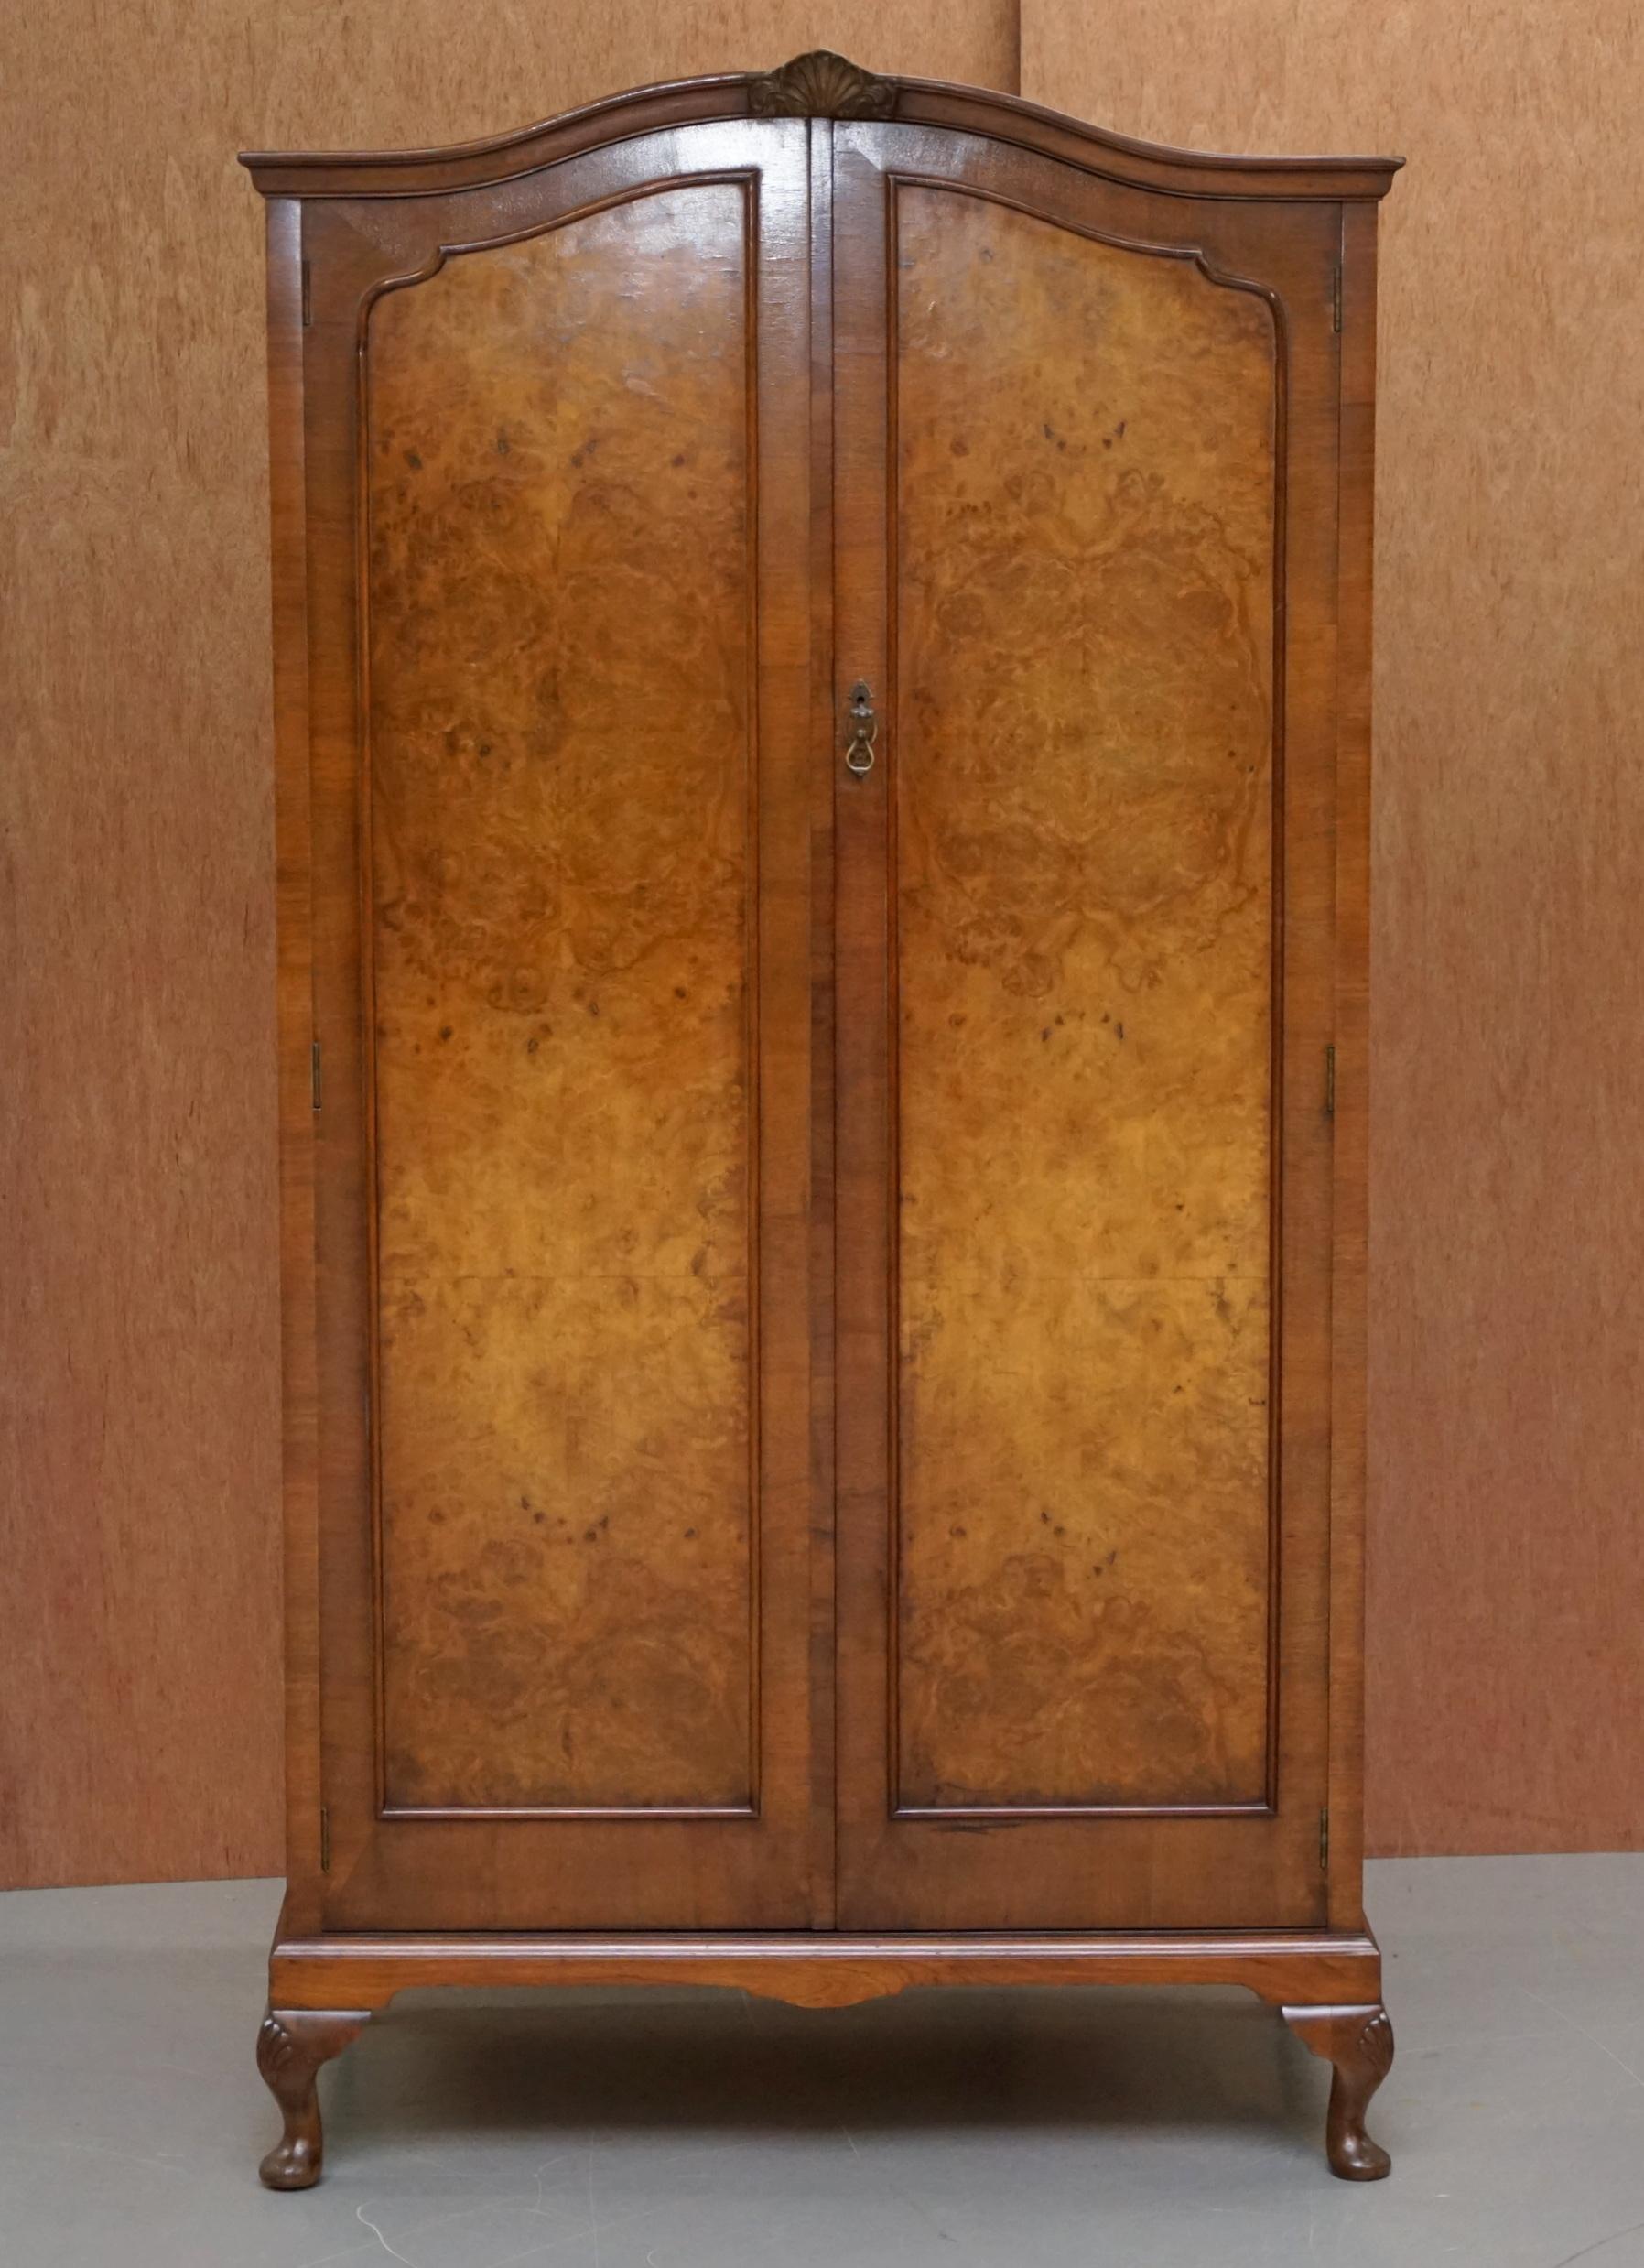 We are delighted to offer for sale this stunning circa 1930’s Figured Walnut wardrobe with internal drawers which is part of a suite

This wardrobe is a lovely size, ideal for an area with a low ceiling like an attic conversion. The piece is